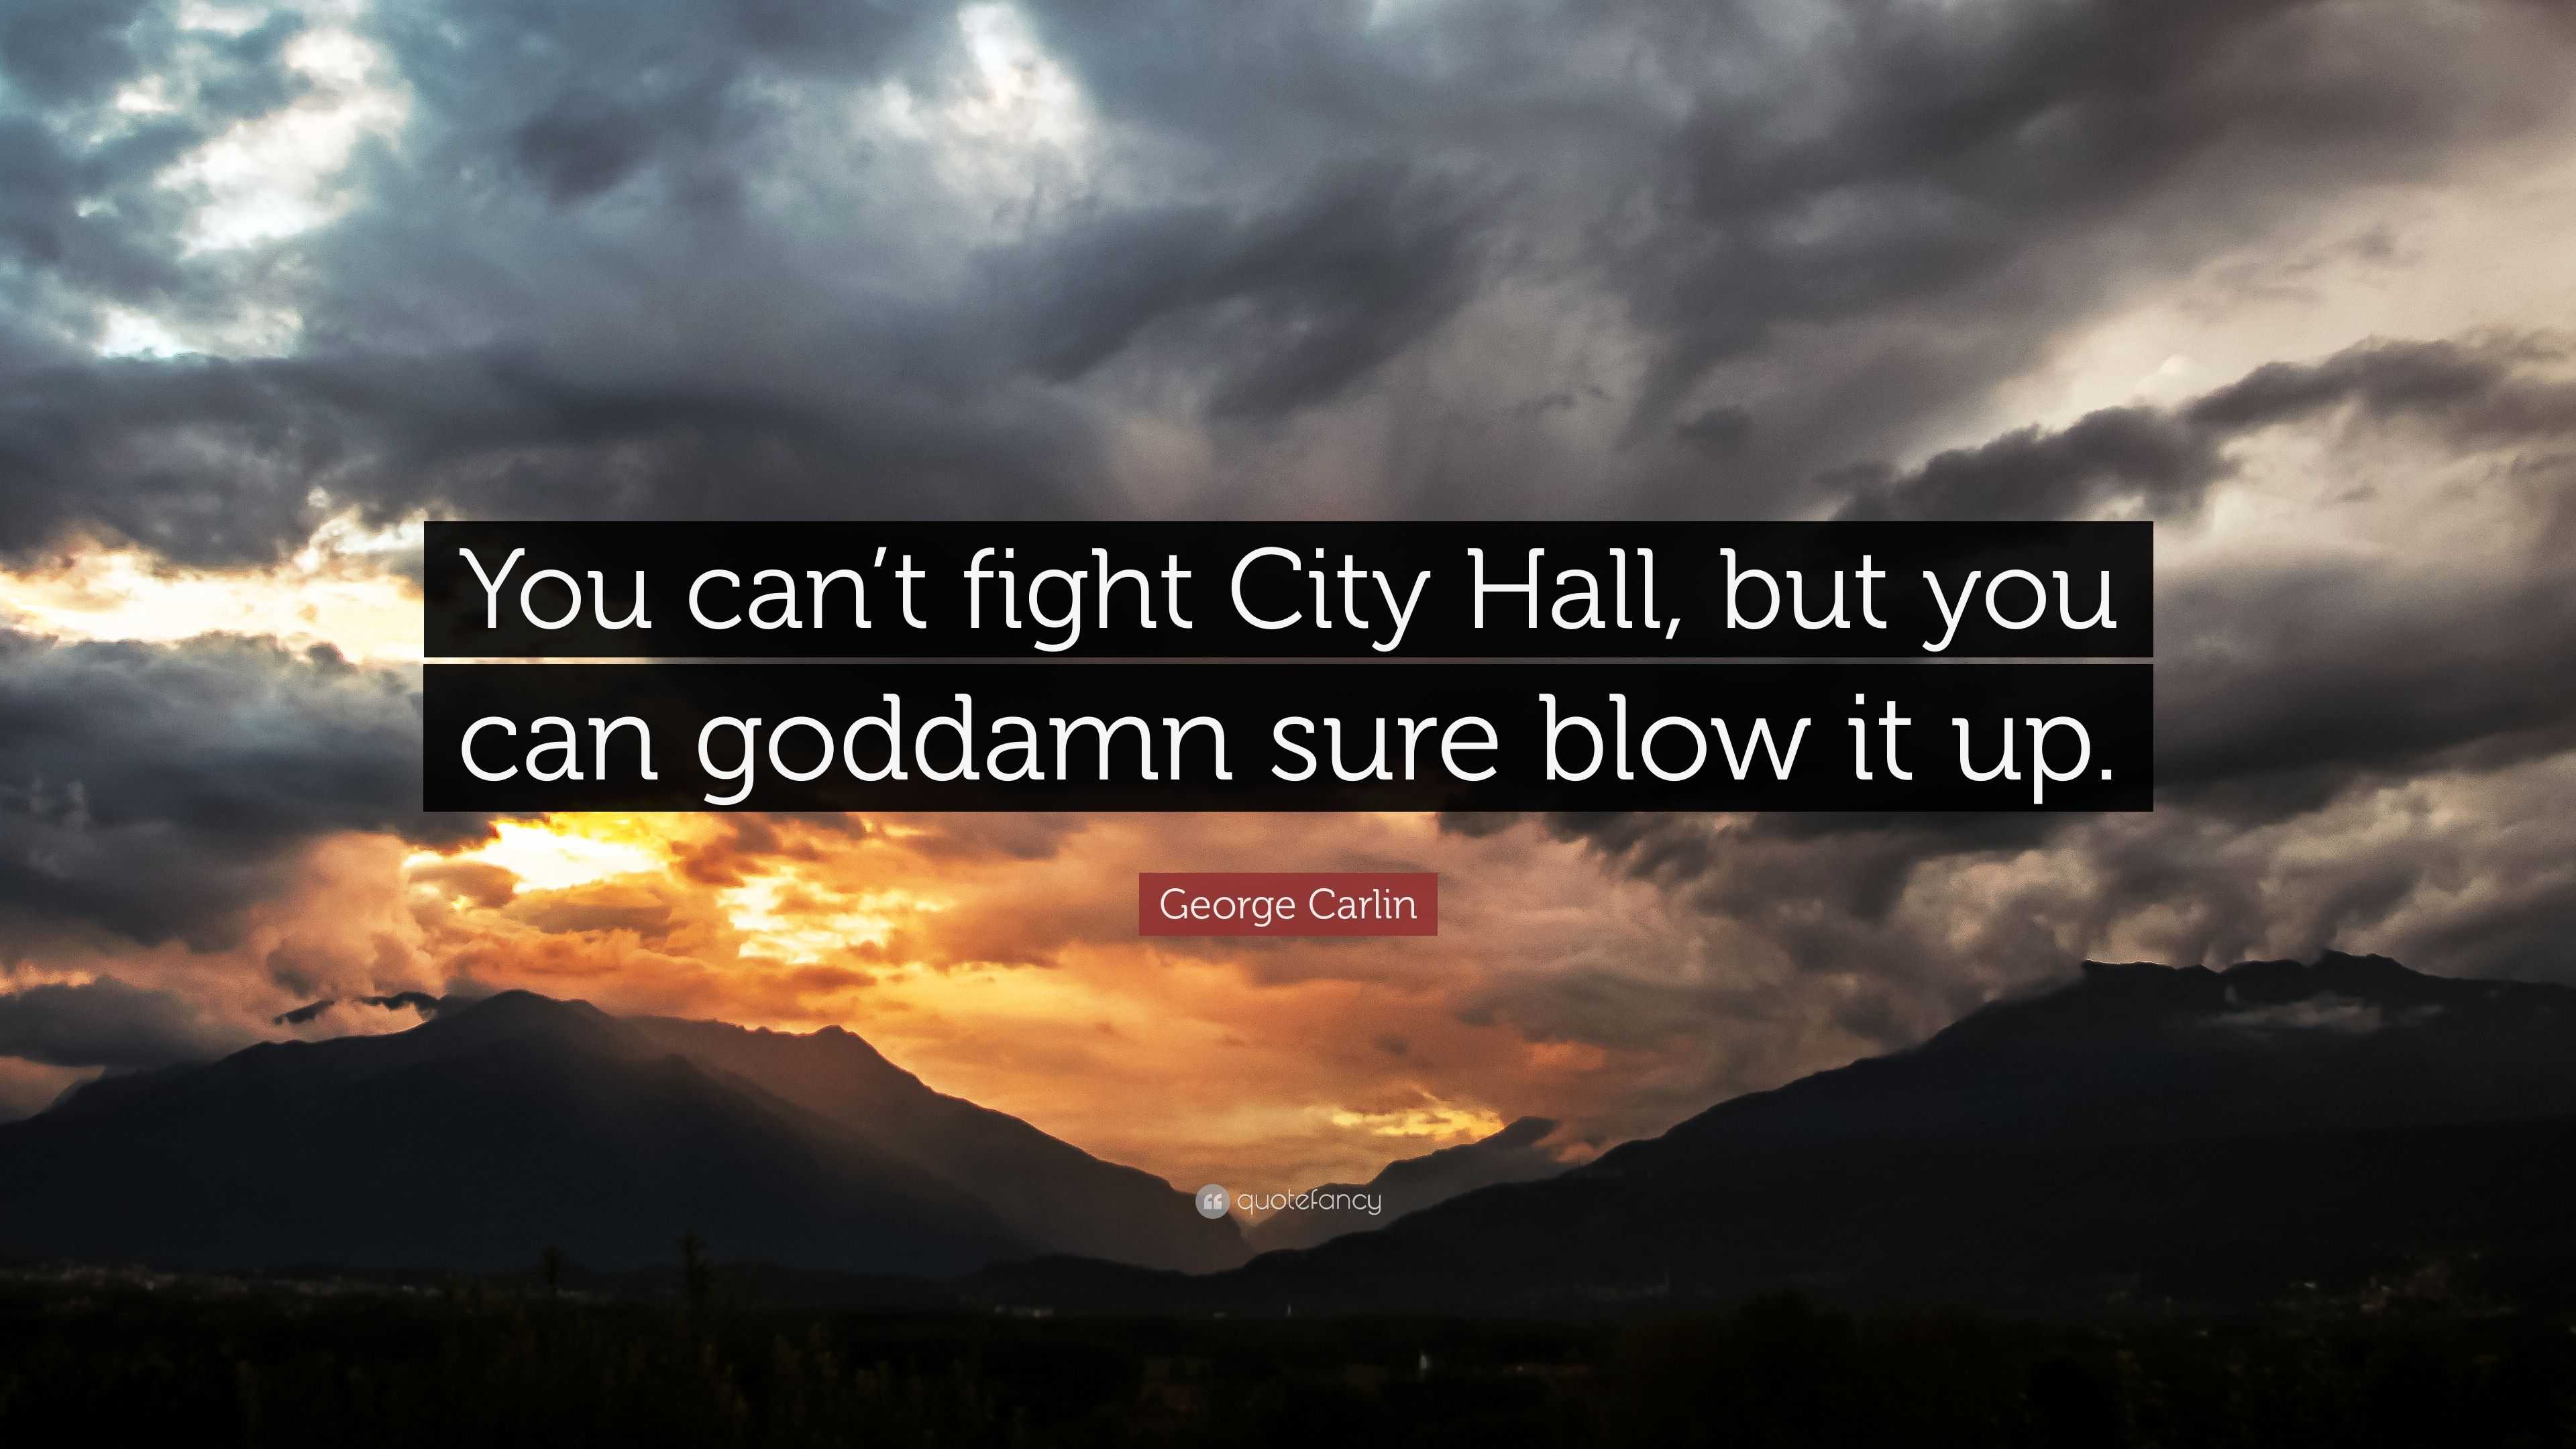 George Carlin Quote “you Cant Fight City Hall But You Can Goddamn Sure Blow It Up”